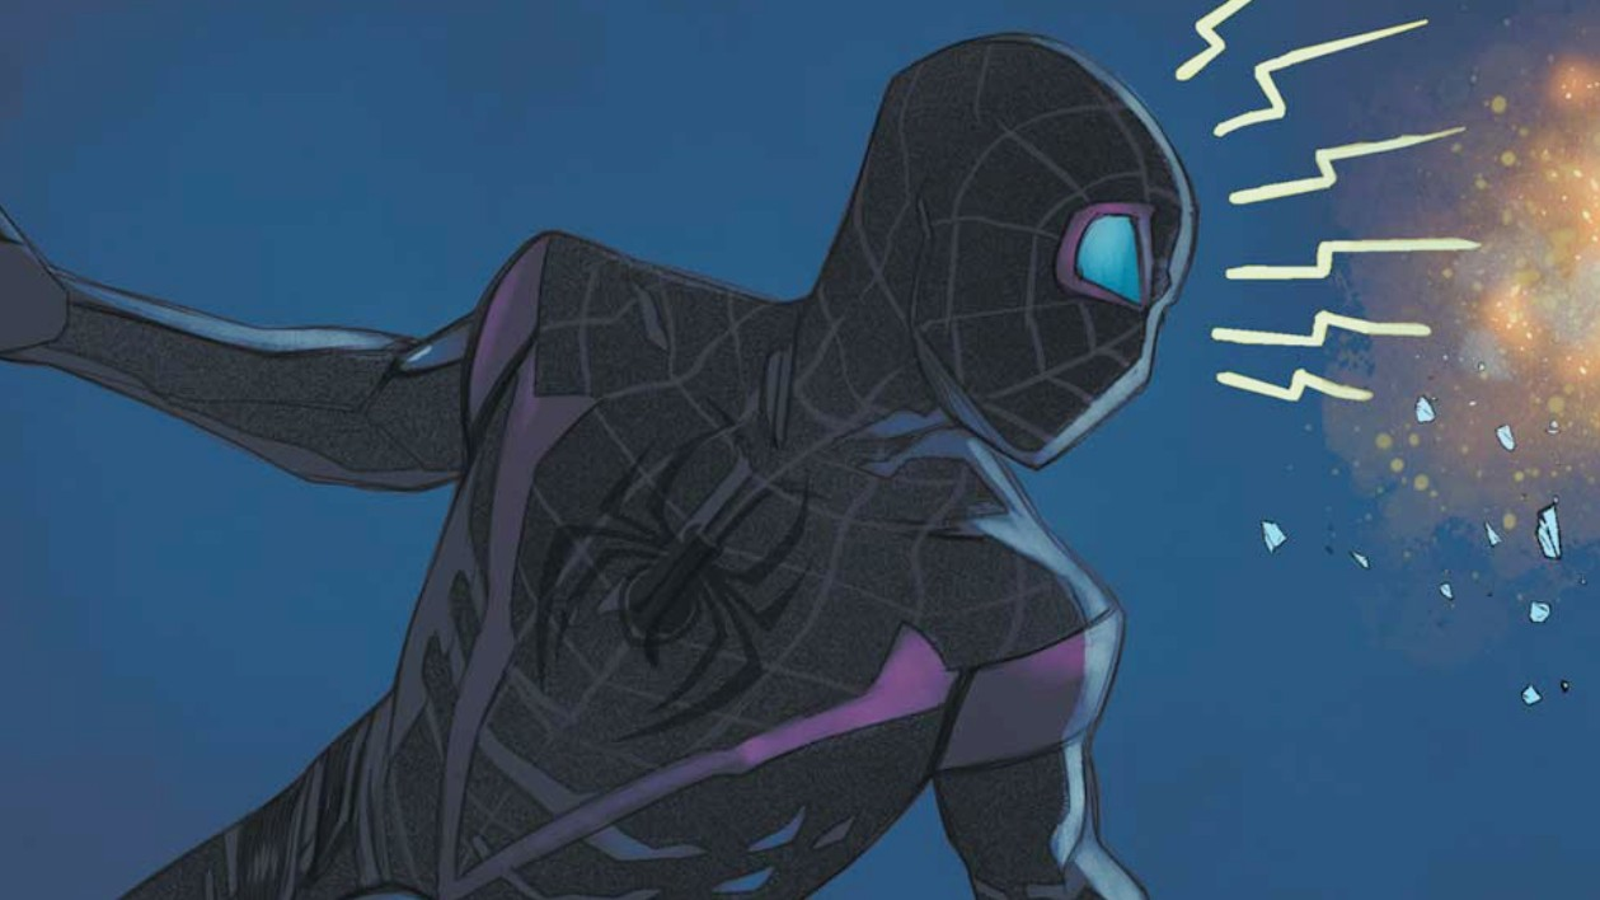 Marvel's Spider-Man 2 prequel comic announced for Free Comic Book Day –  PlayStation.Blog